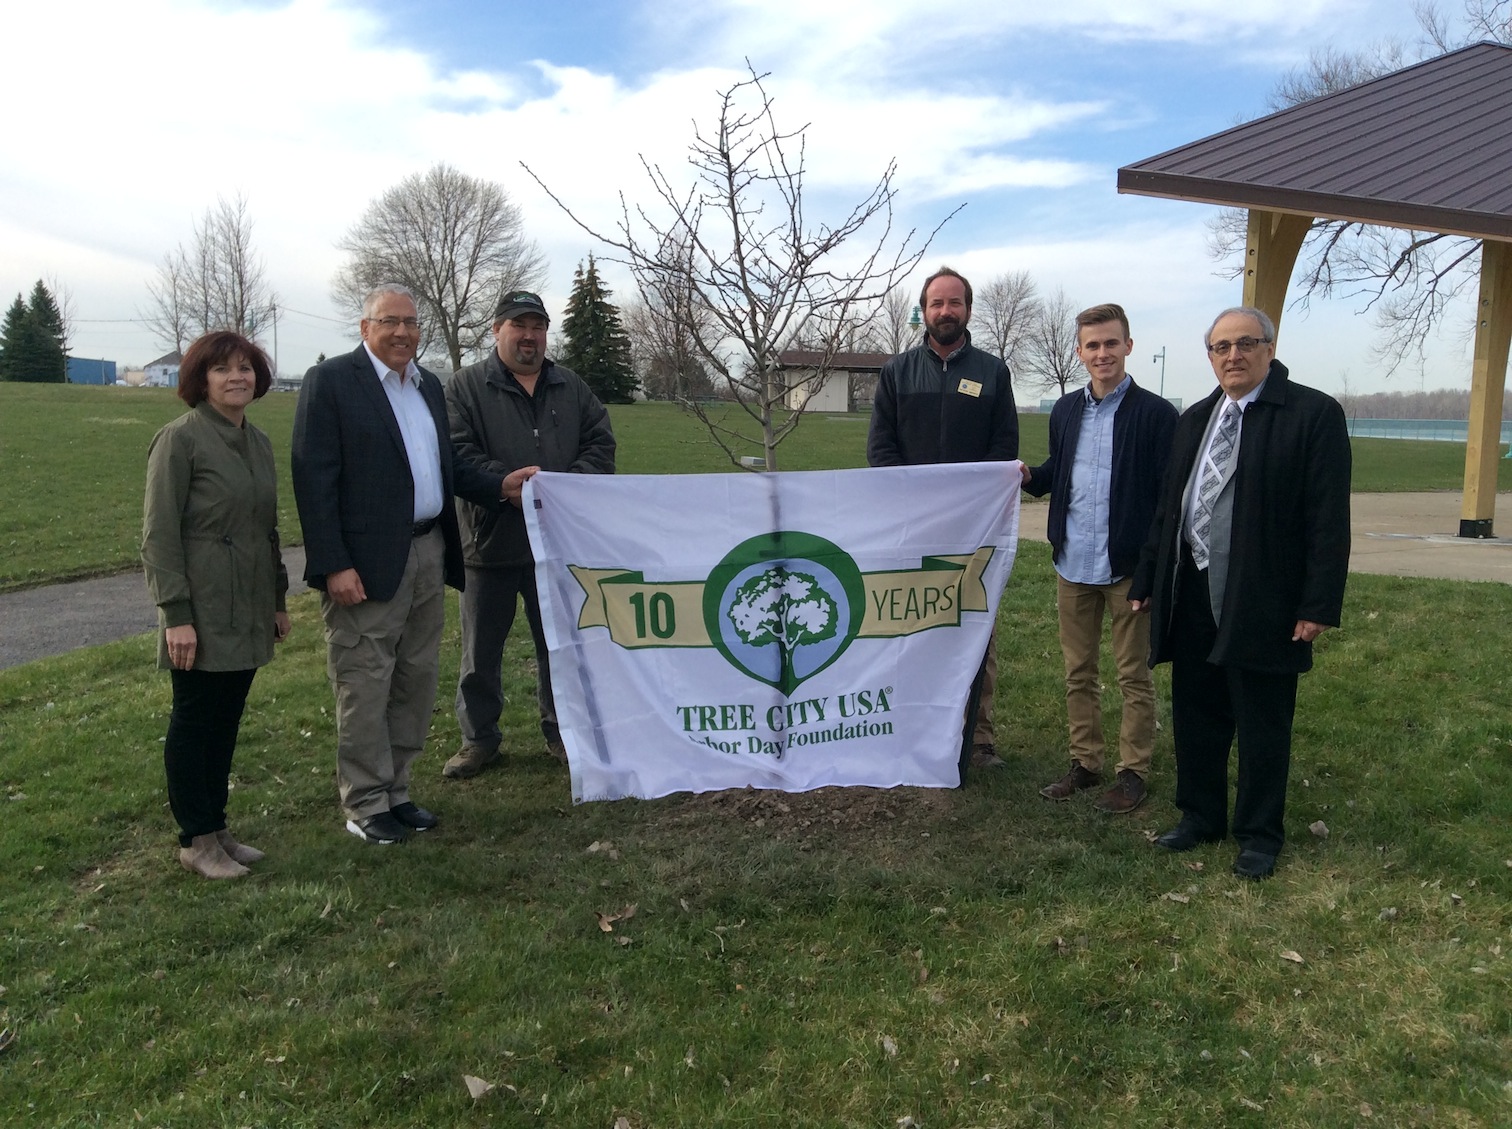 Pictured, from left, Parks and Recreation Director Patty Brosius; Alderman-at-Large Robert Pecoraro; Department of Public Works Superintendent Mark Zellner; Senior Forester with the New York State Department of Environmental Conservation Patrick Marren; Alderman-at-Large Austin Tylec; and North Tonawanda Mayor Arthur Pappas.